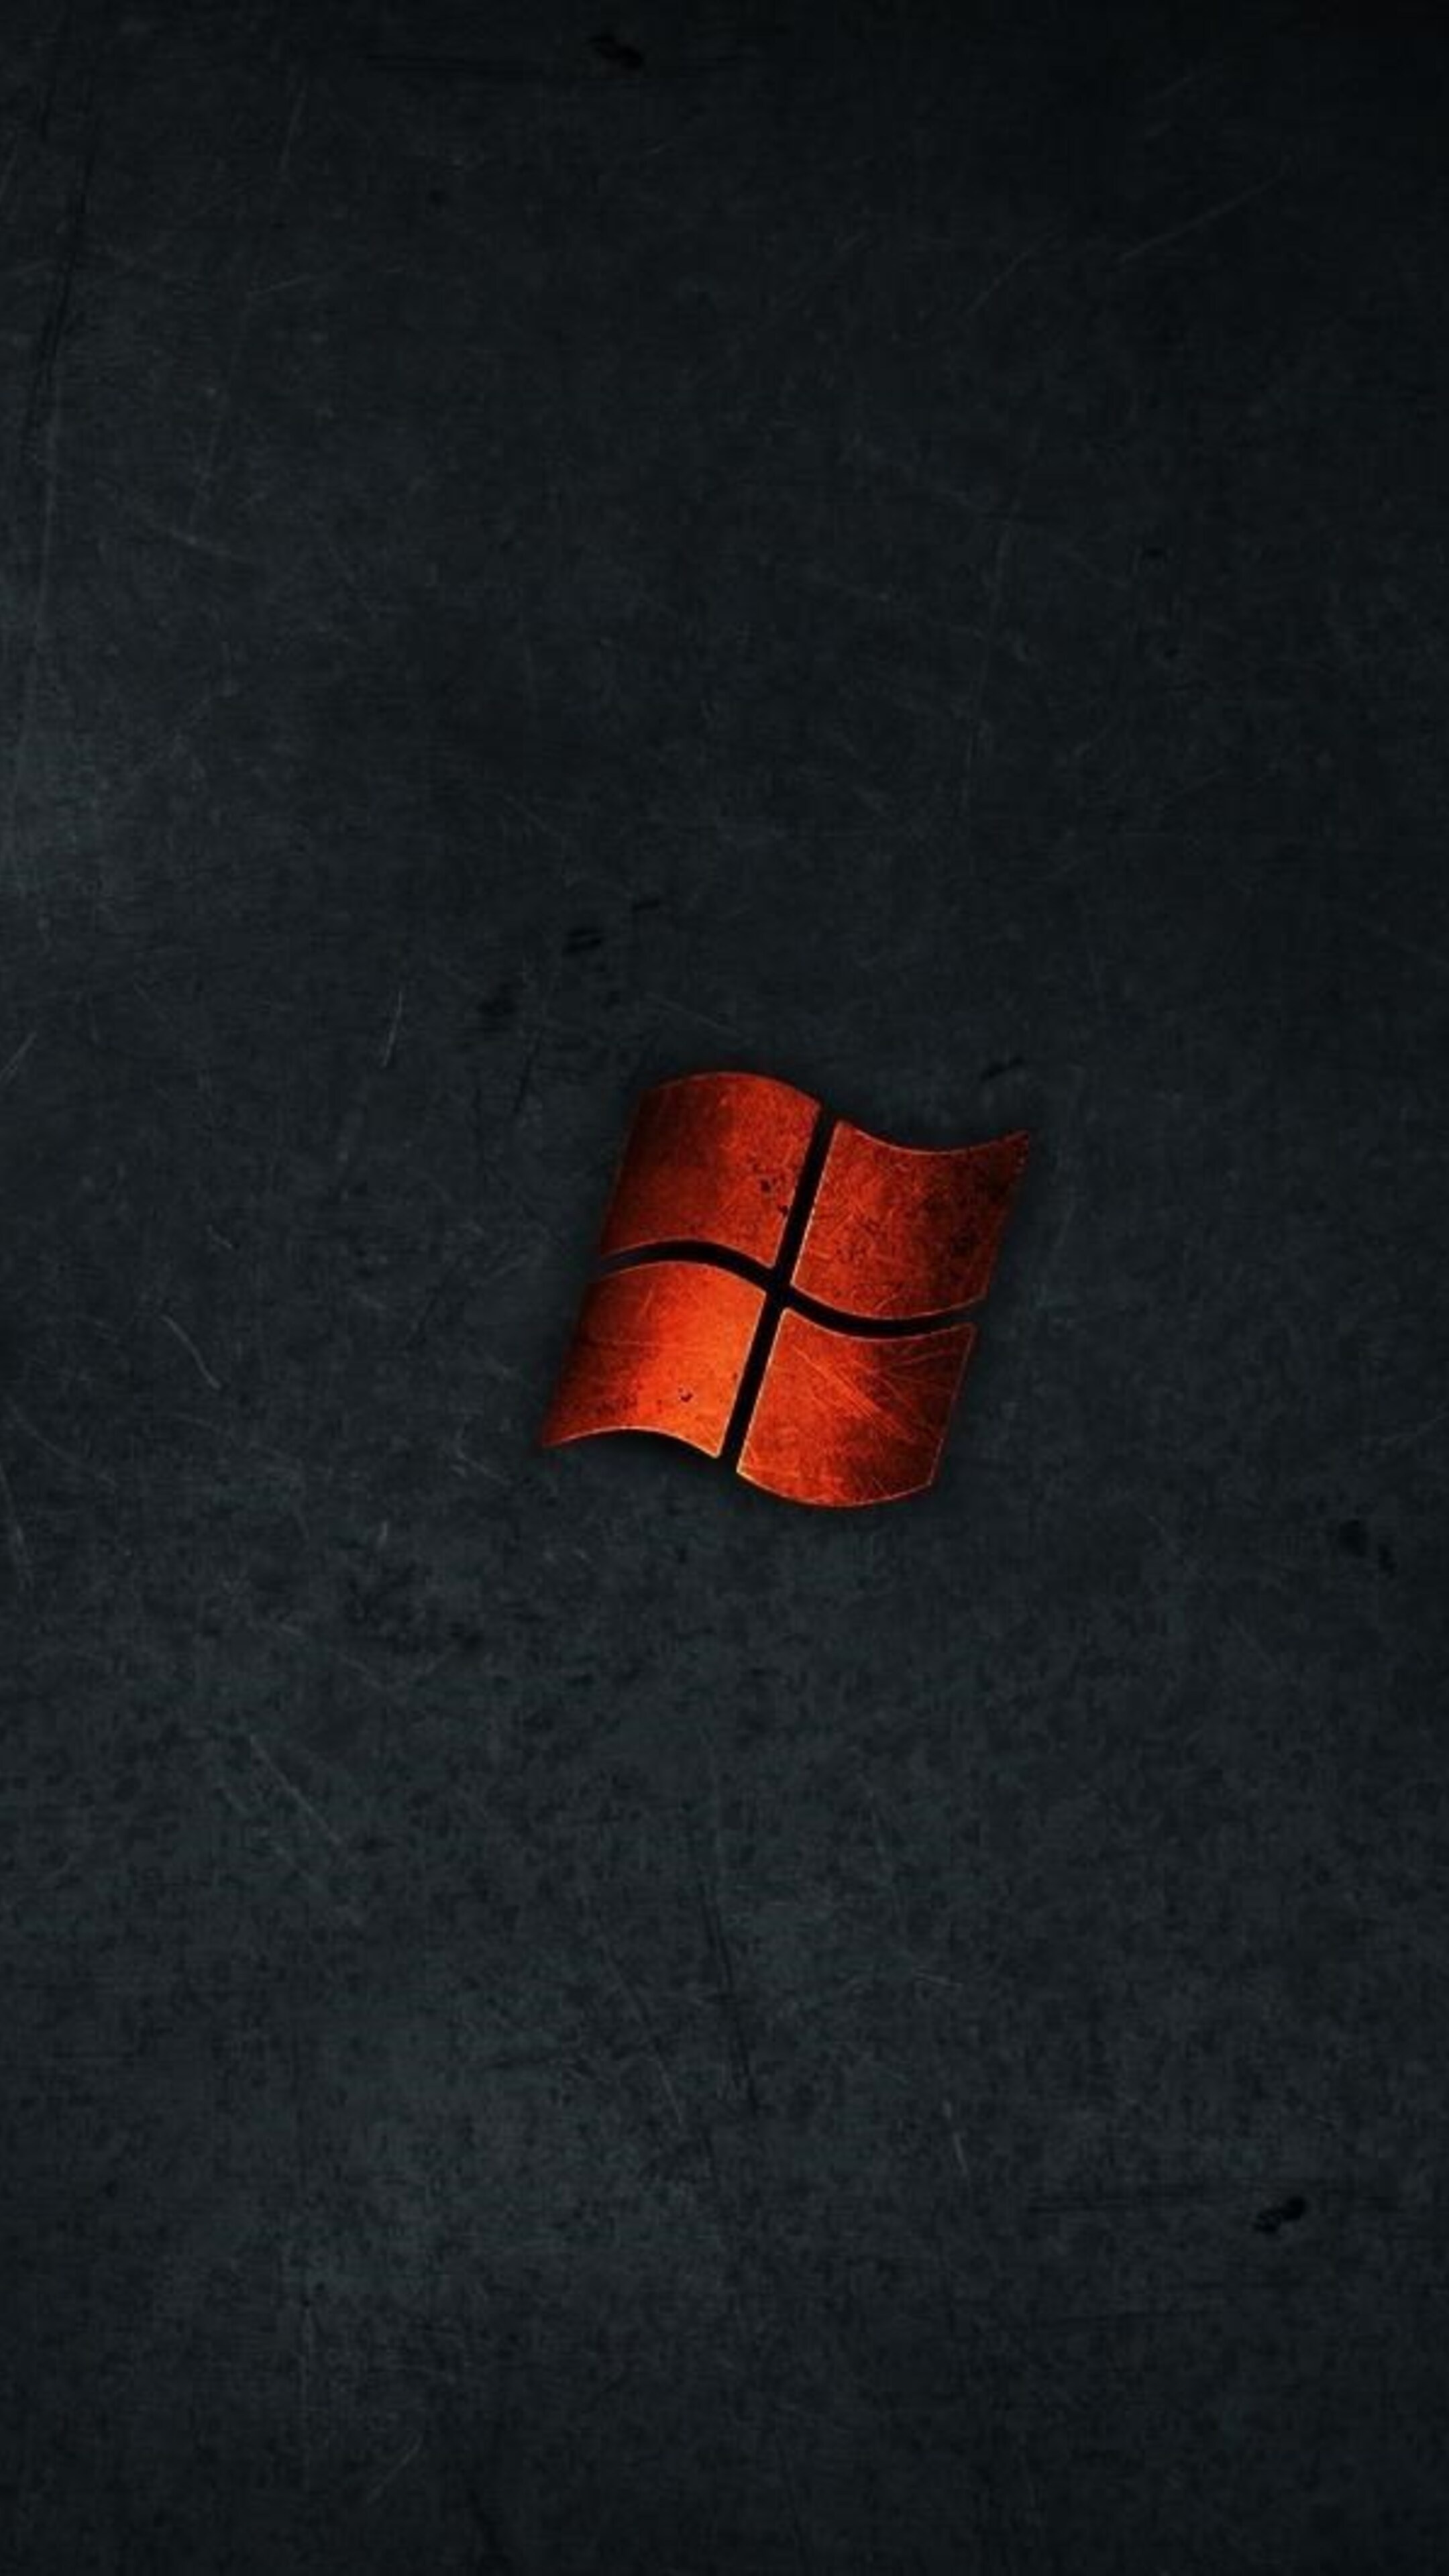 Microsoft: Windows, One of the Big Five American information technology companies. 2160x3840 4K Background.